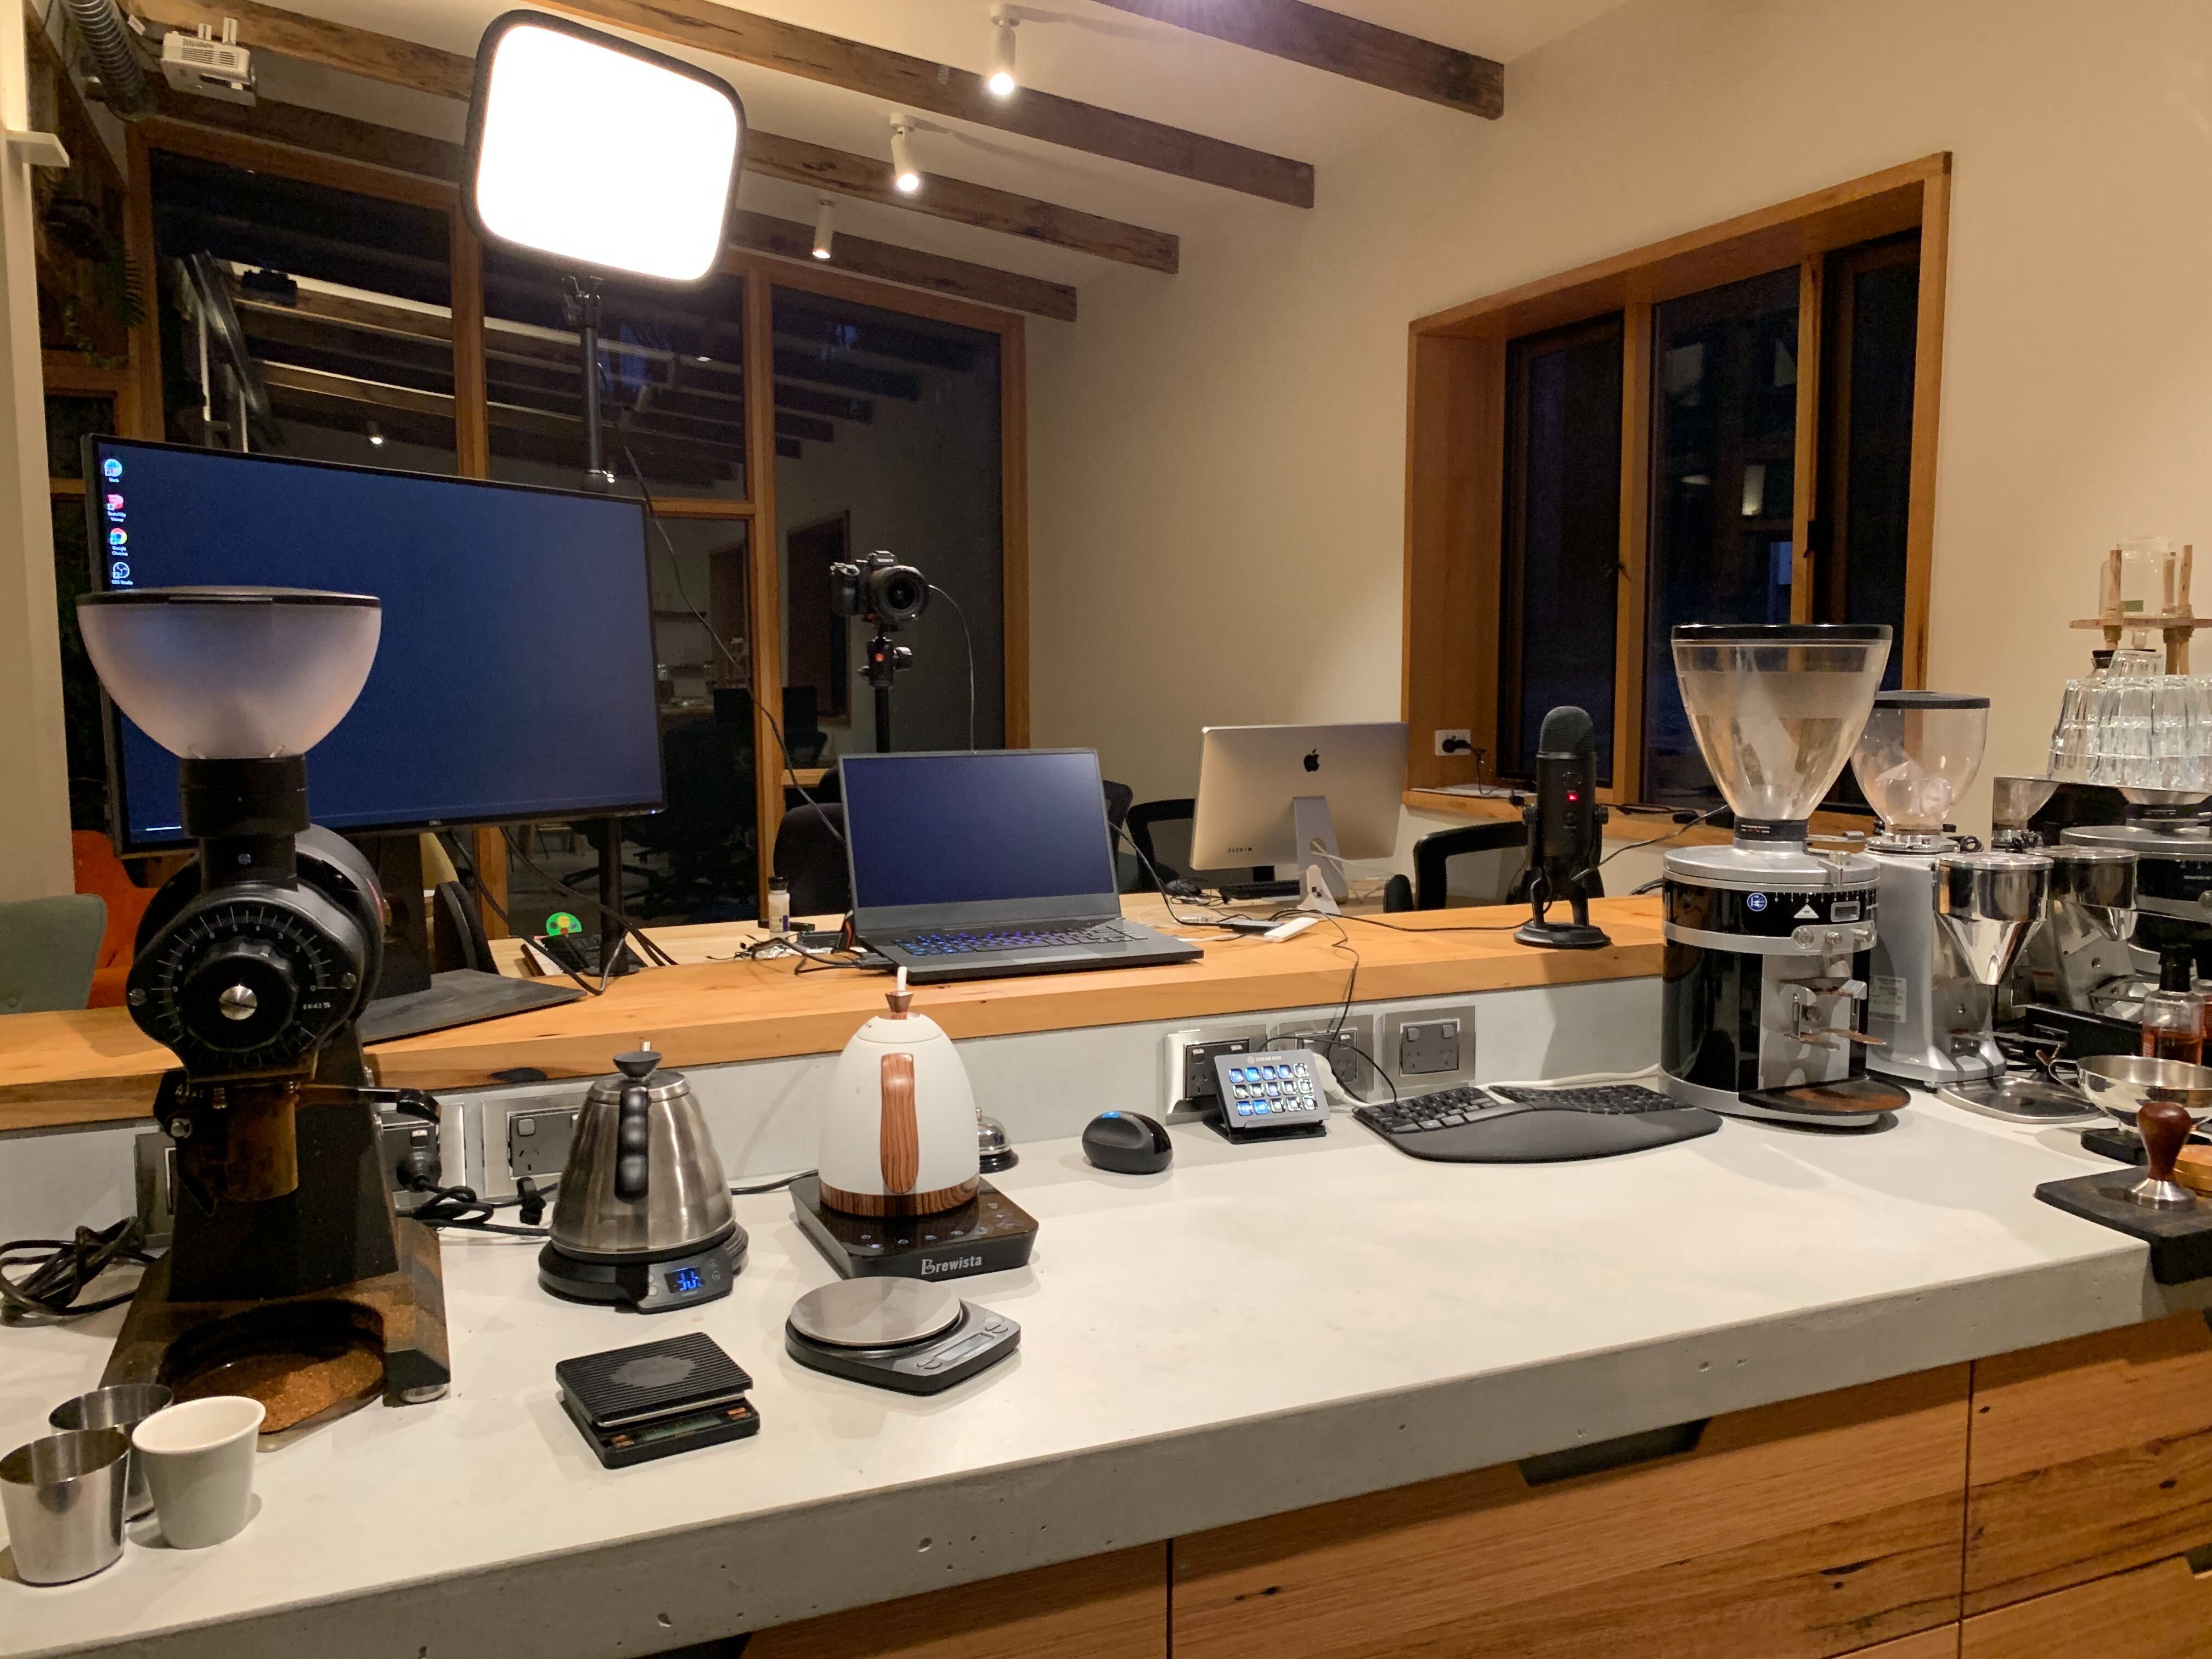 Joel's coffee bar set up at night, featuring all his coffee making tools and broadcast equipment